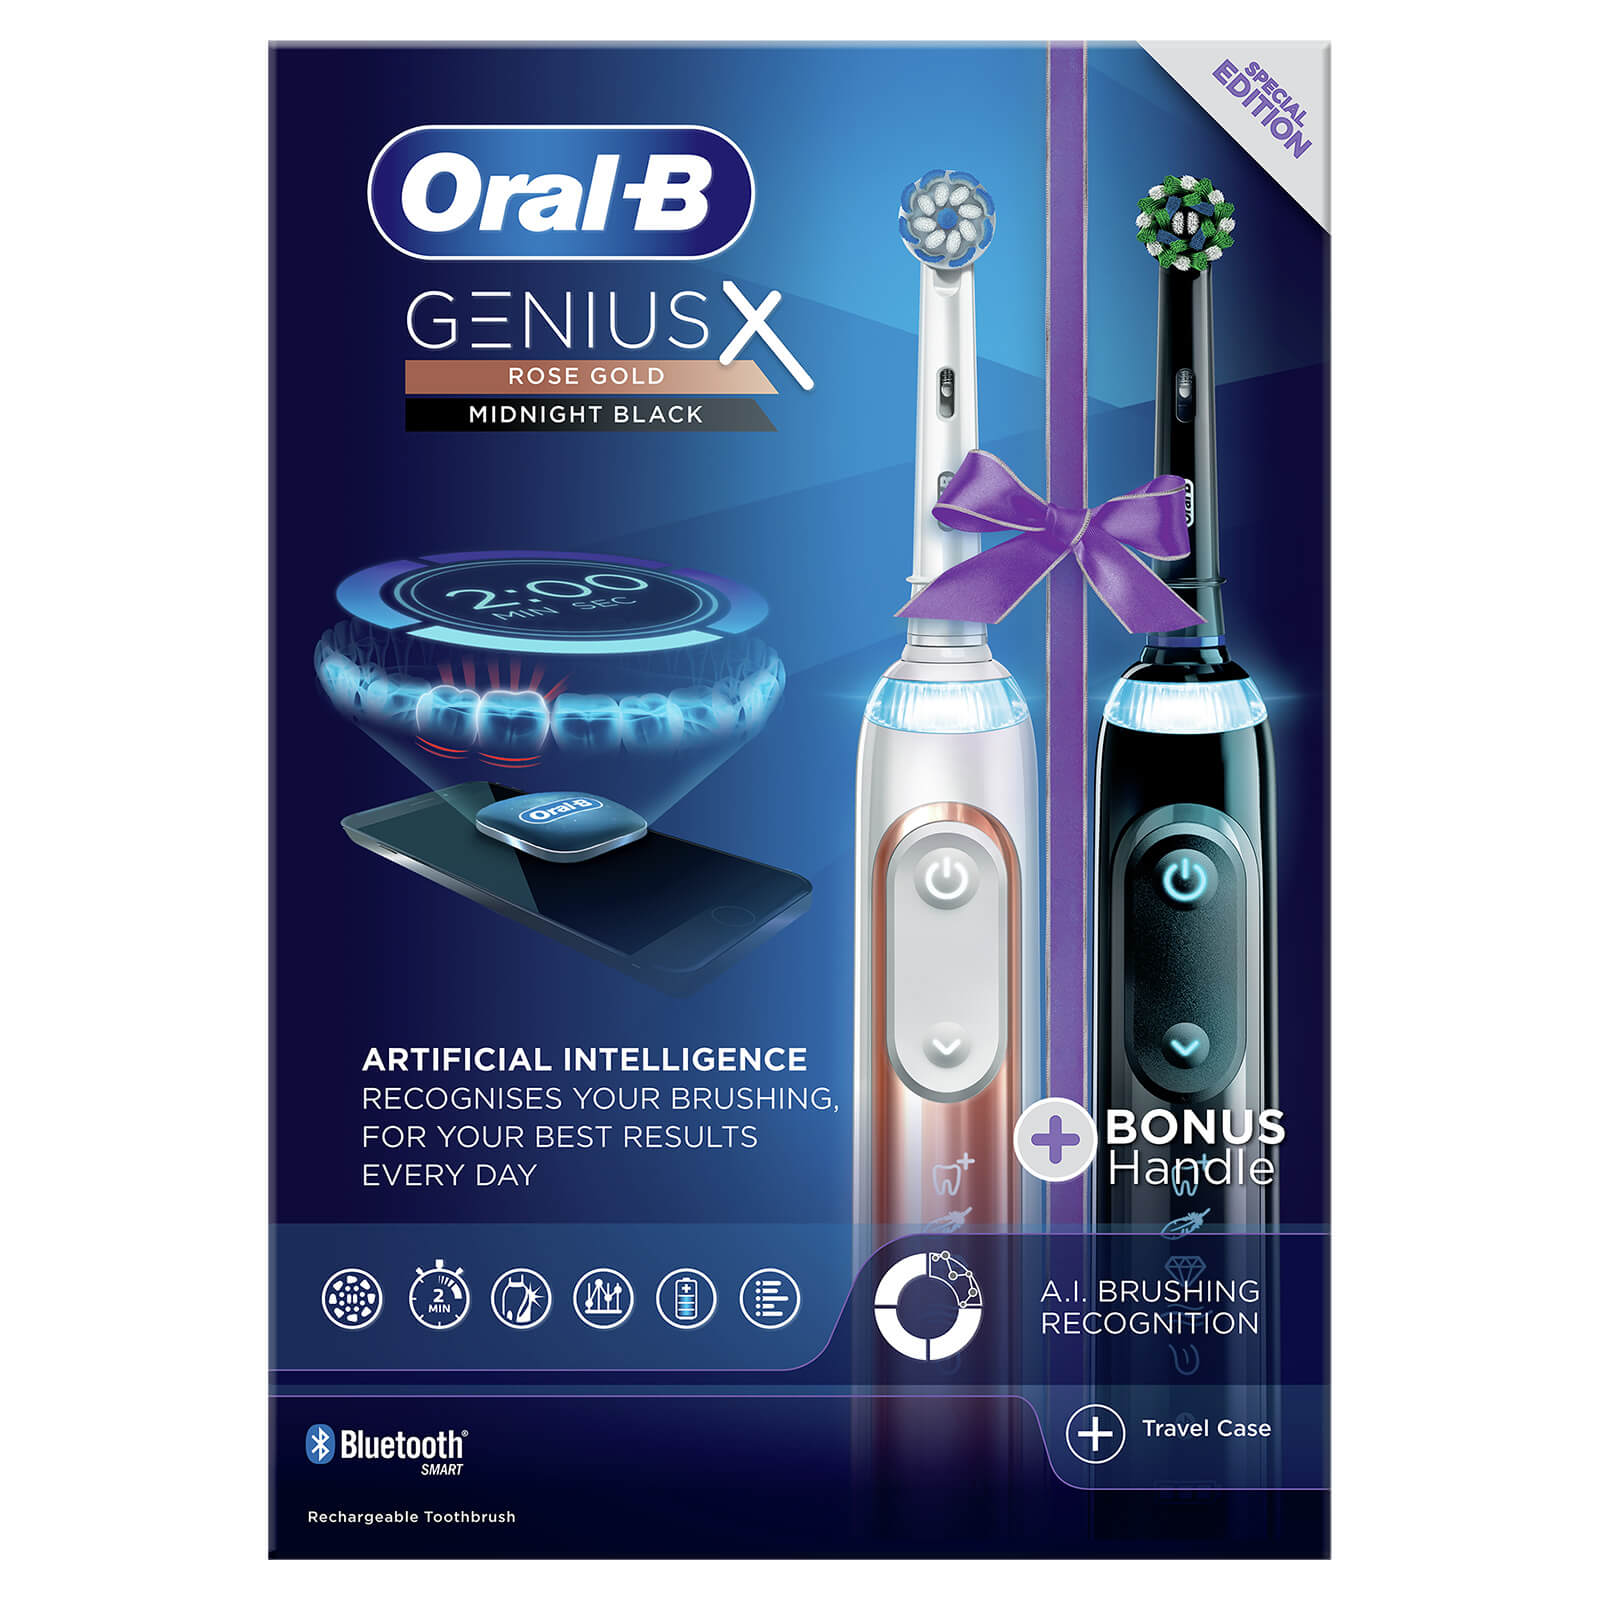 Oral-B Genius X Duo Pack of Two Electric Toothbrushes, Rose Gold & Black - Toothbrush